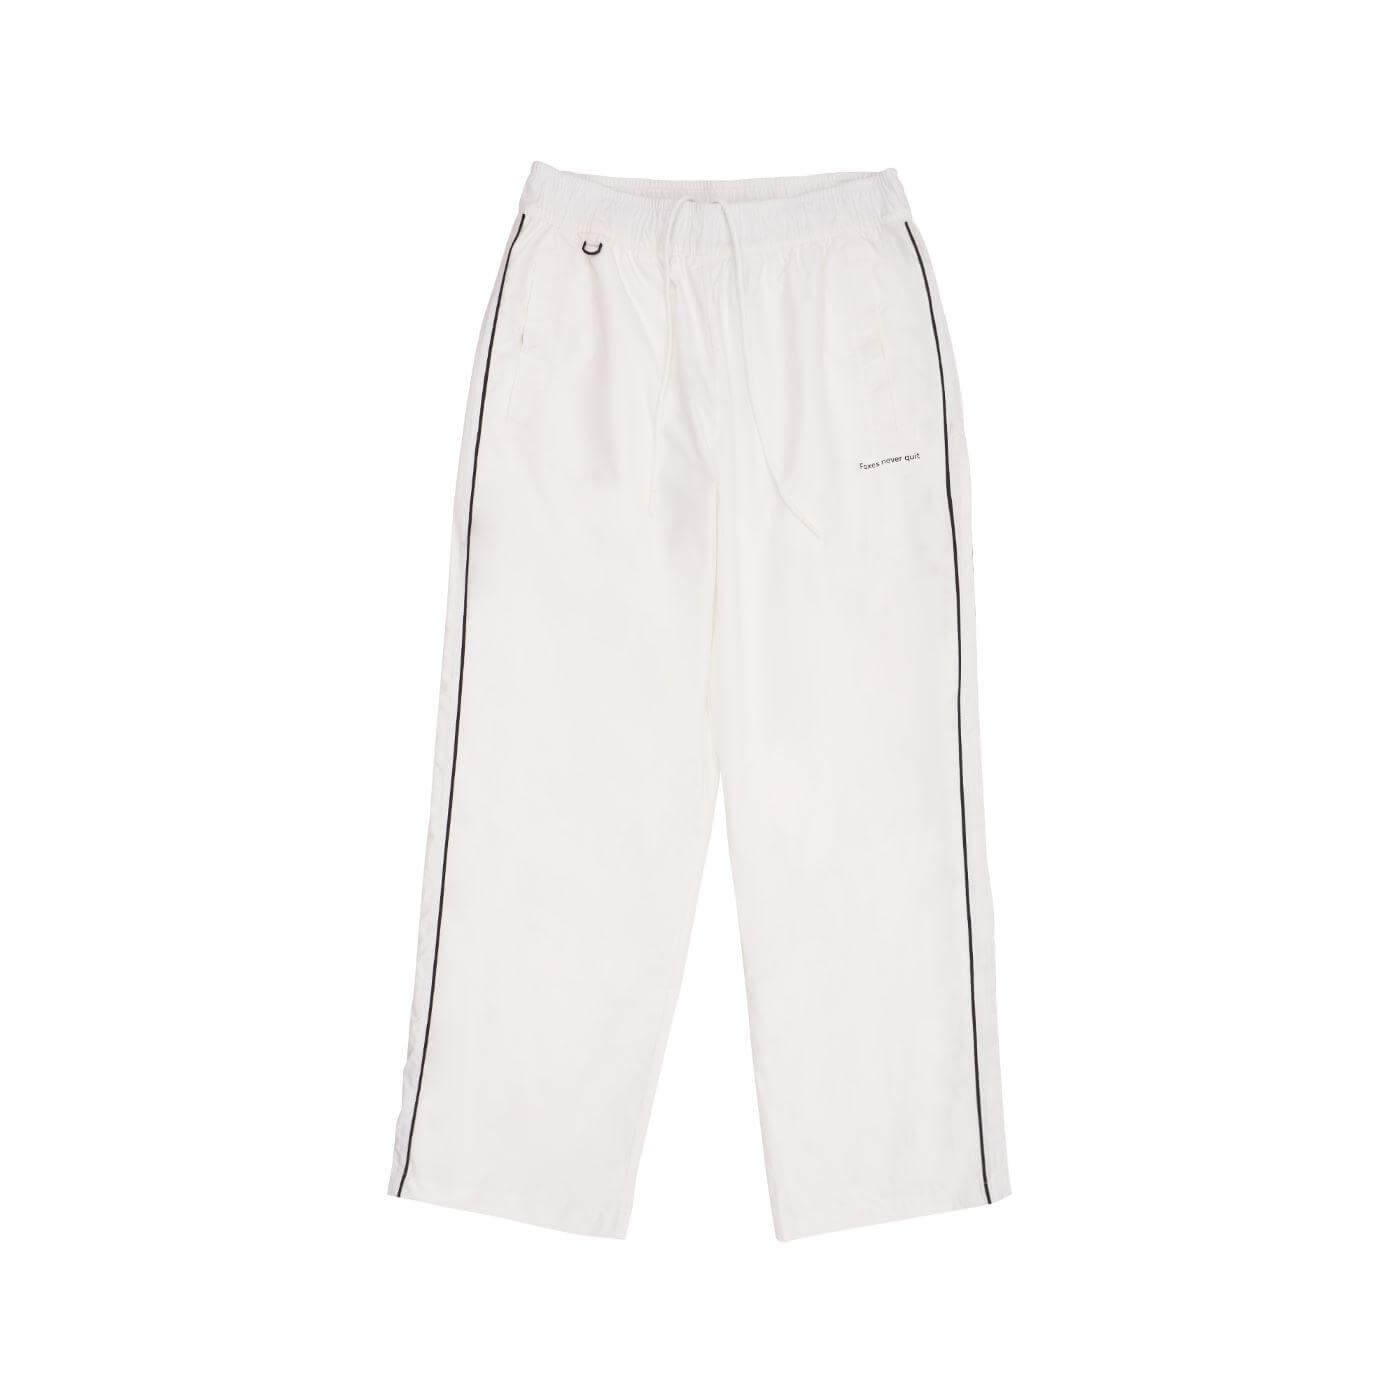 Leicester City Football Club Simple Direction Trousers White  Size S_免税价格_亿点免税